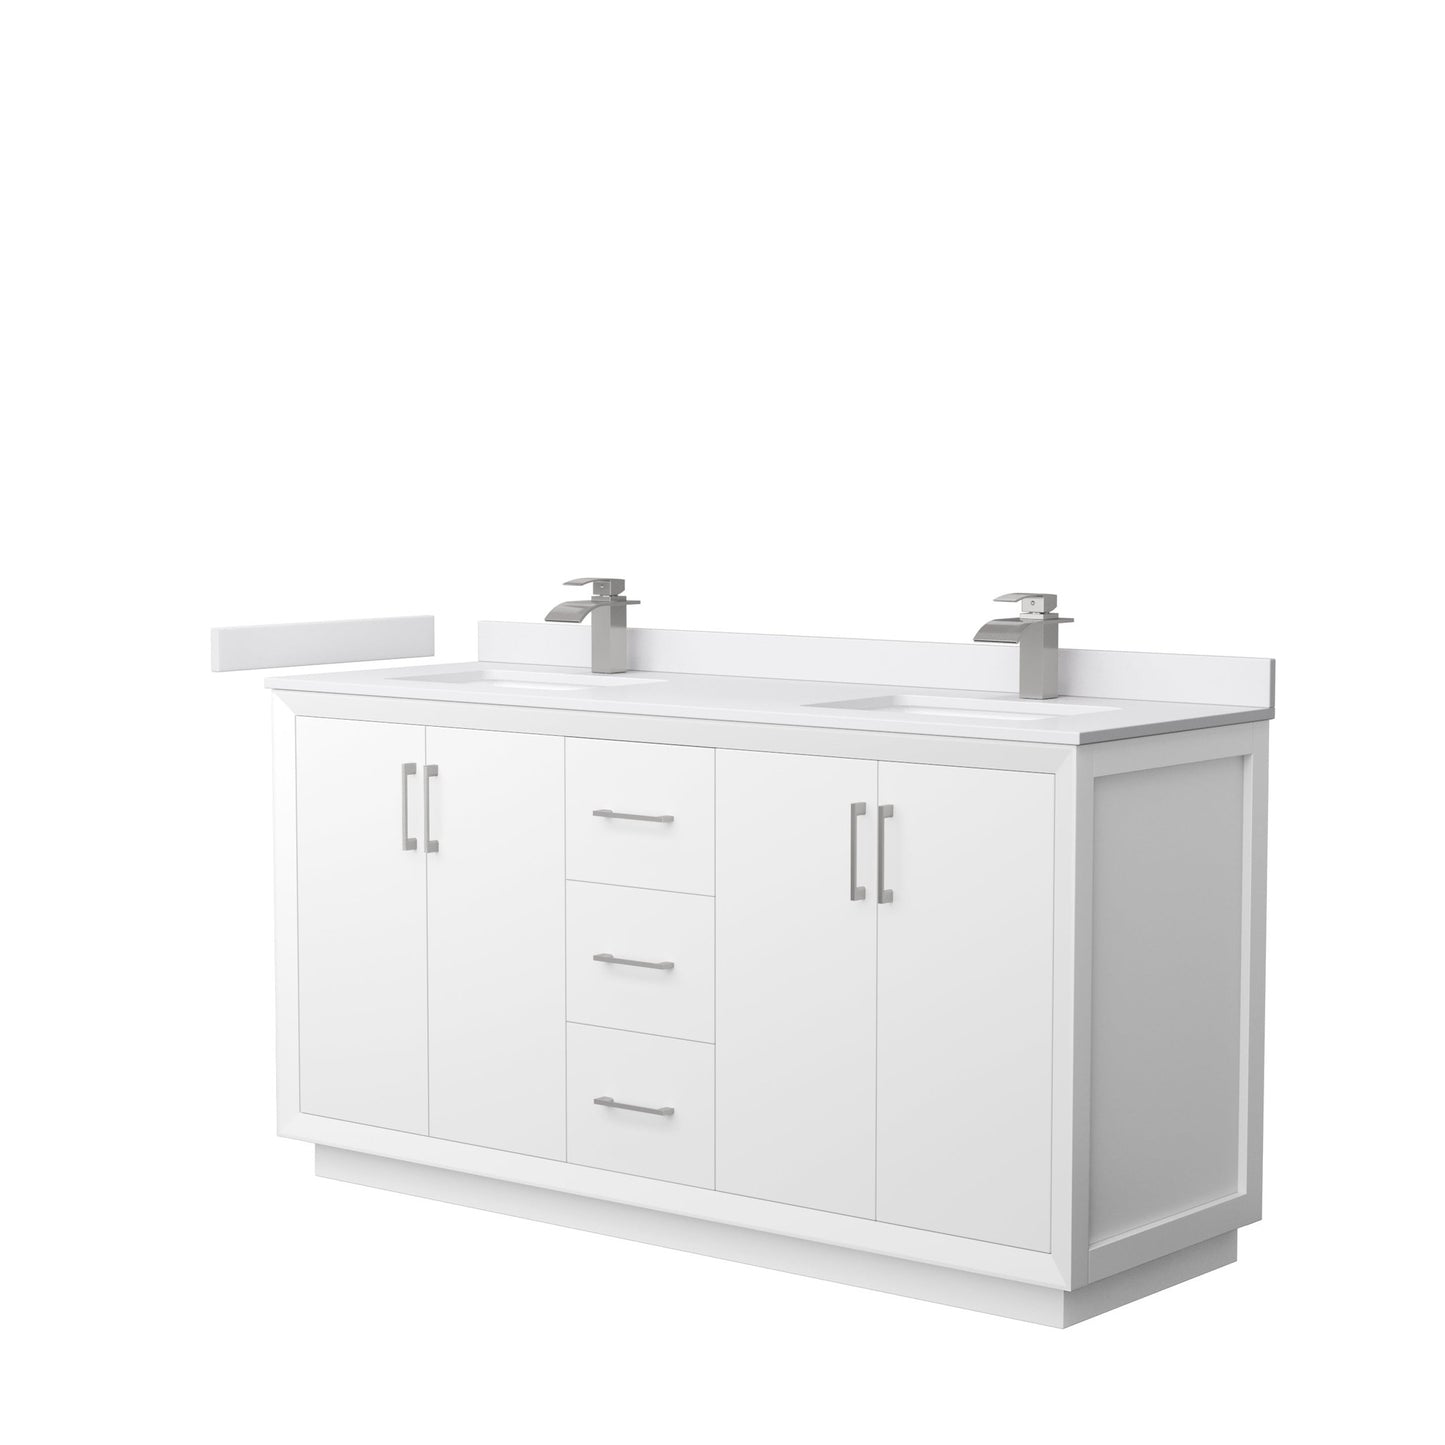 Wyndham Collection Strada 66" Double Bathroom Vanity in White, White Cultured Marble Countertop, Undermount Square Sink, Brushed Nickel Trim